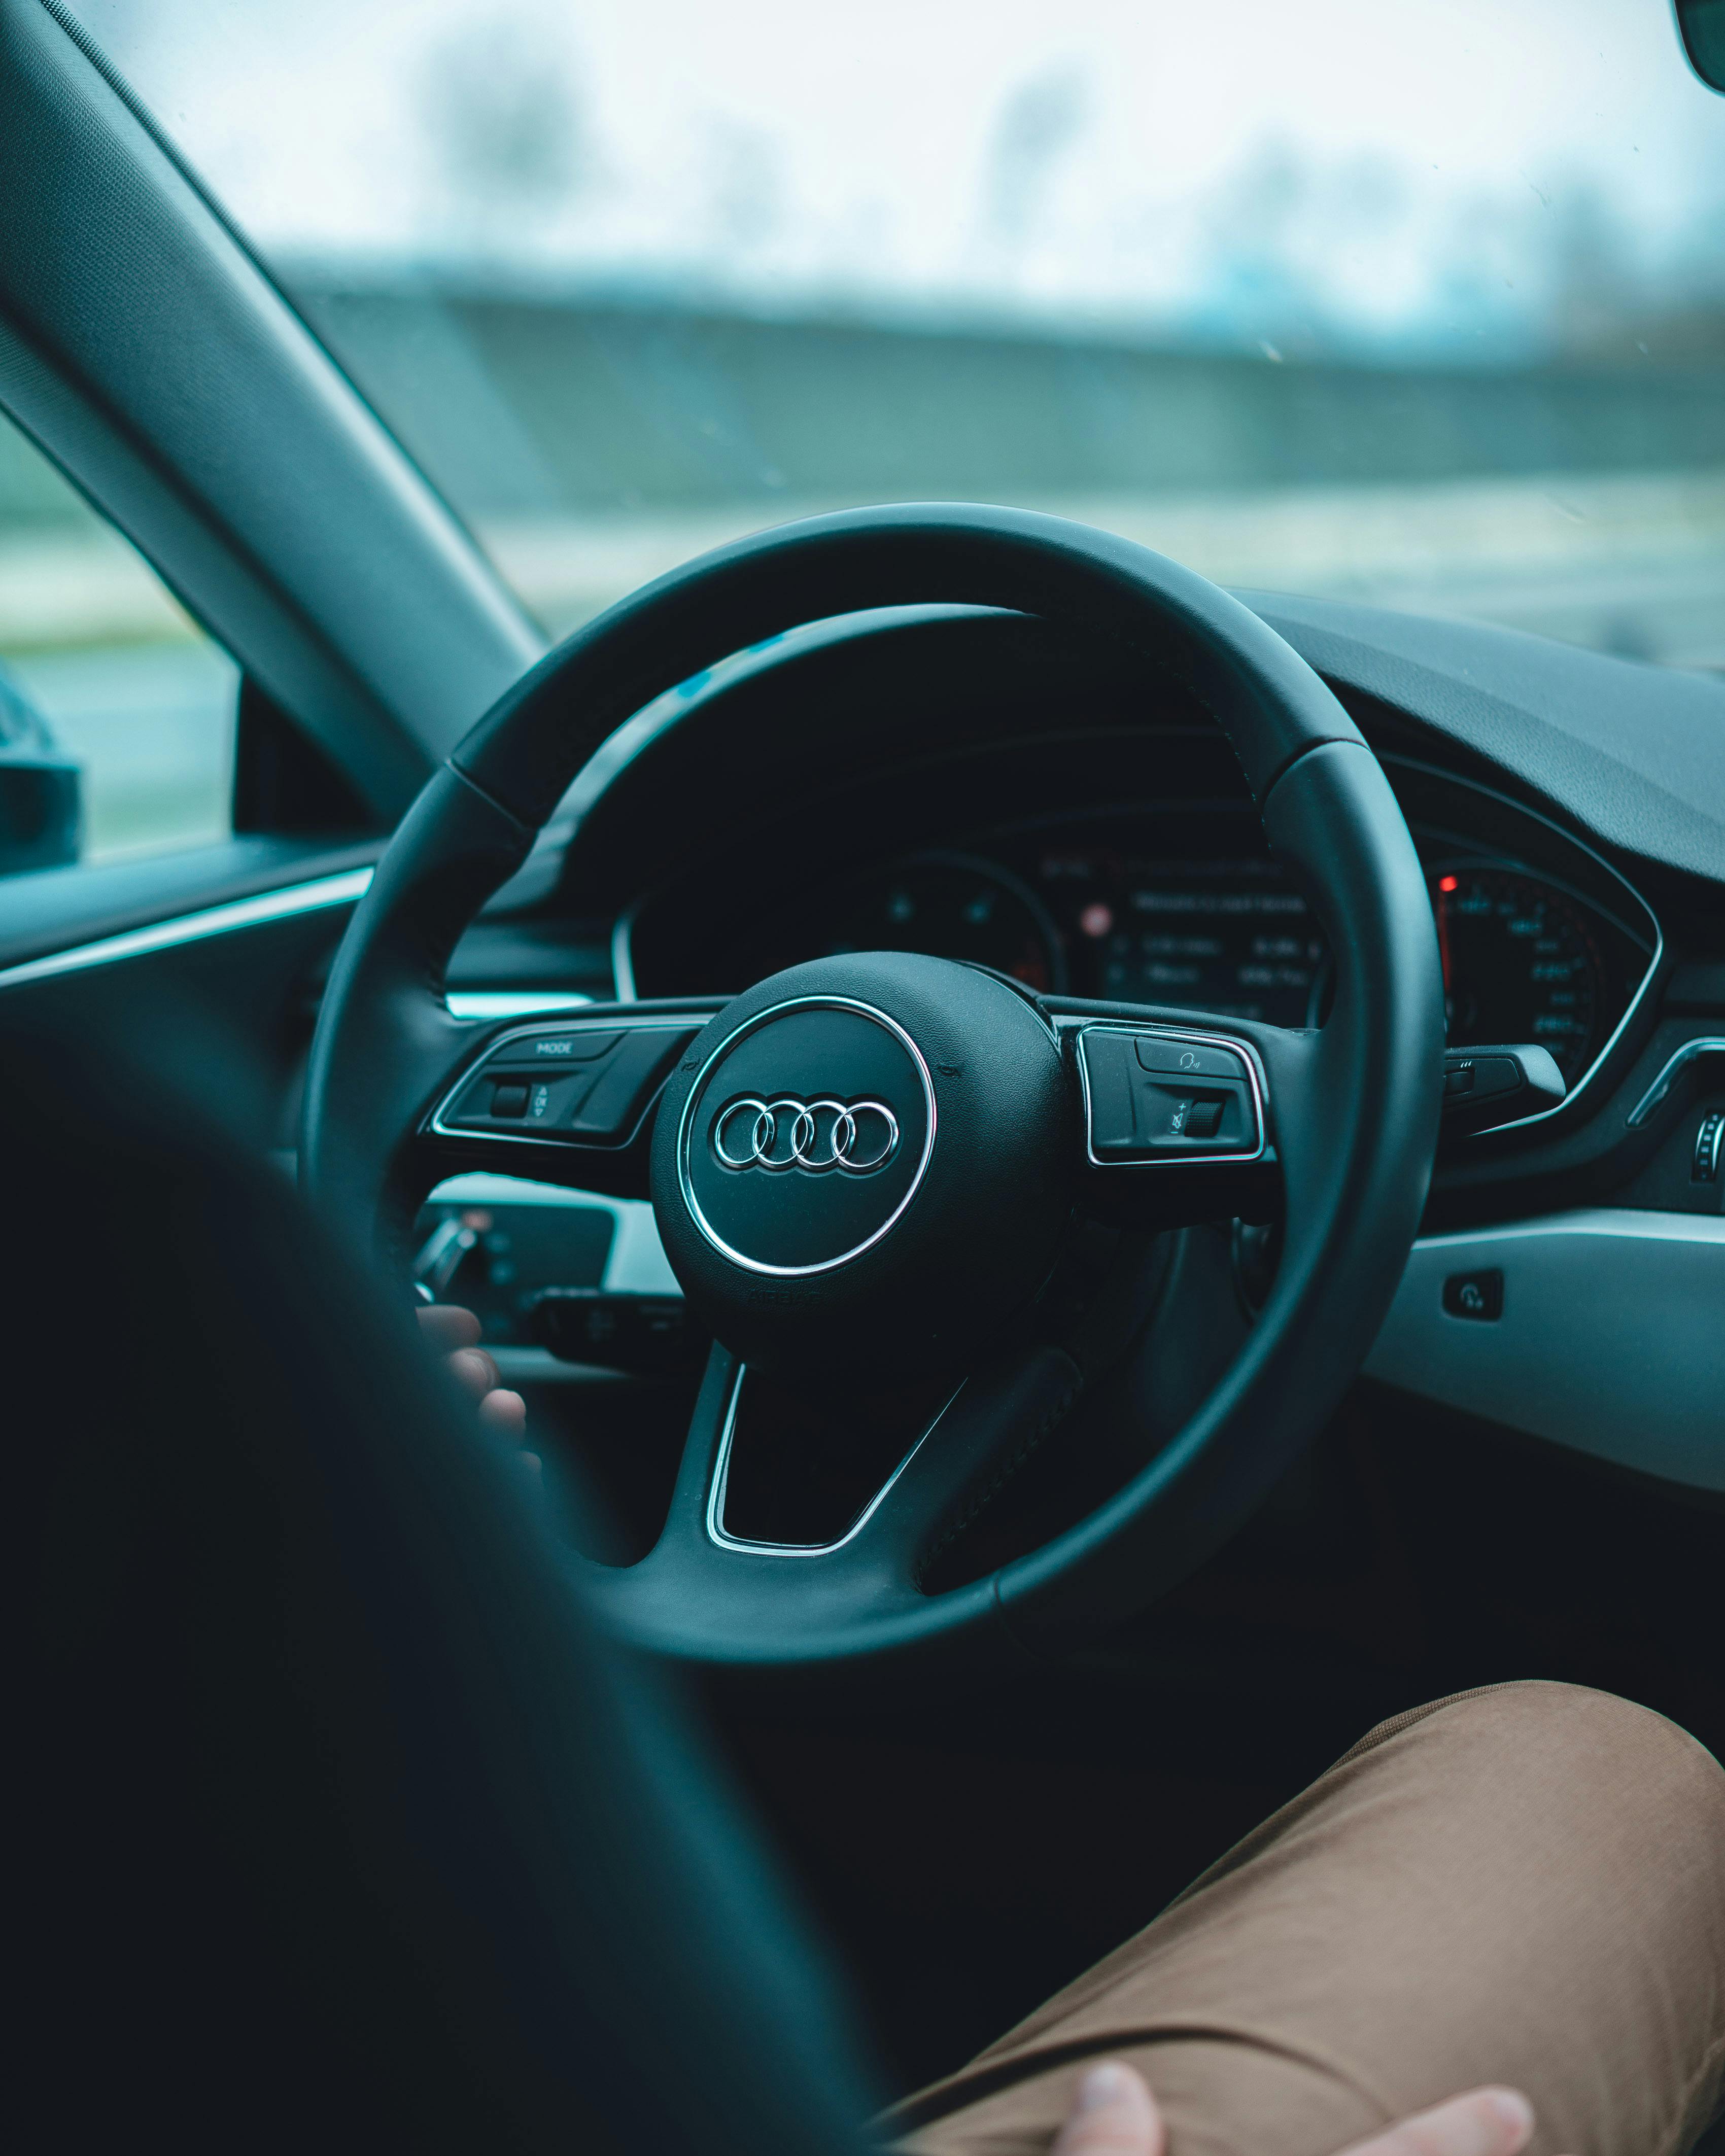 Audi Photos, Download The BEST Free Audi Stock Photos & HD Images